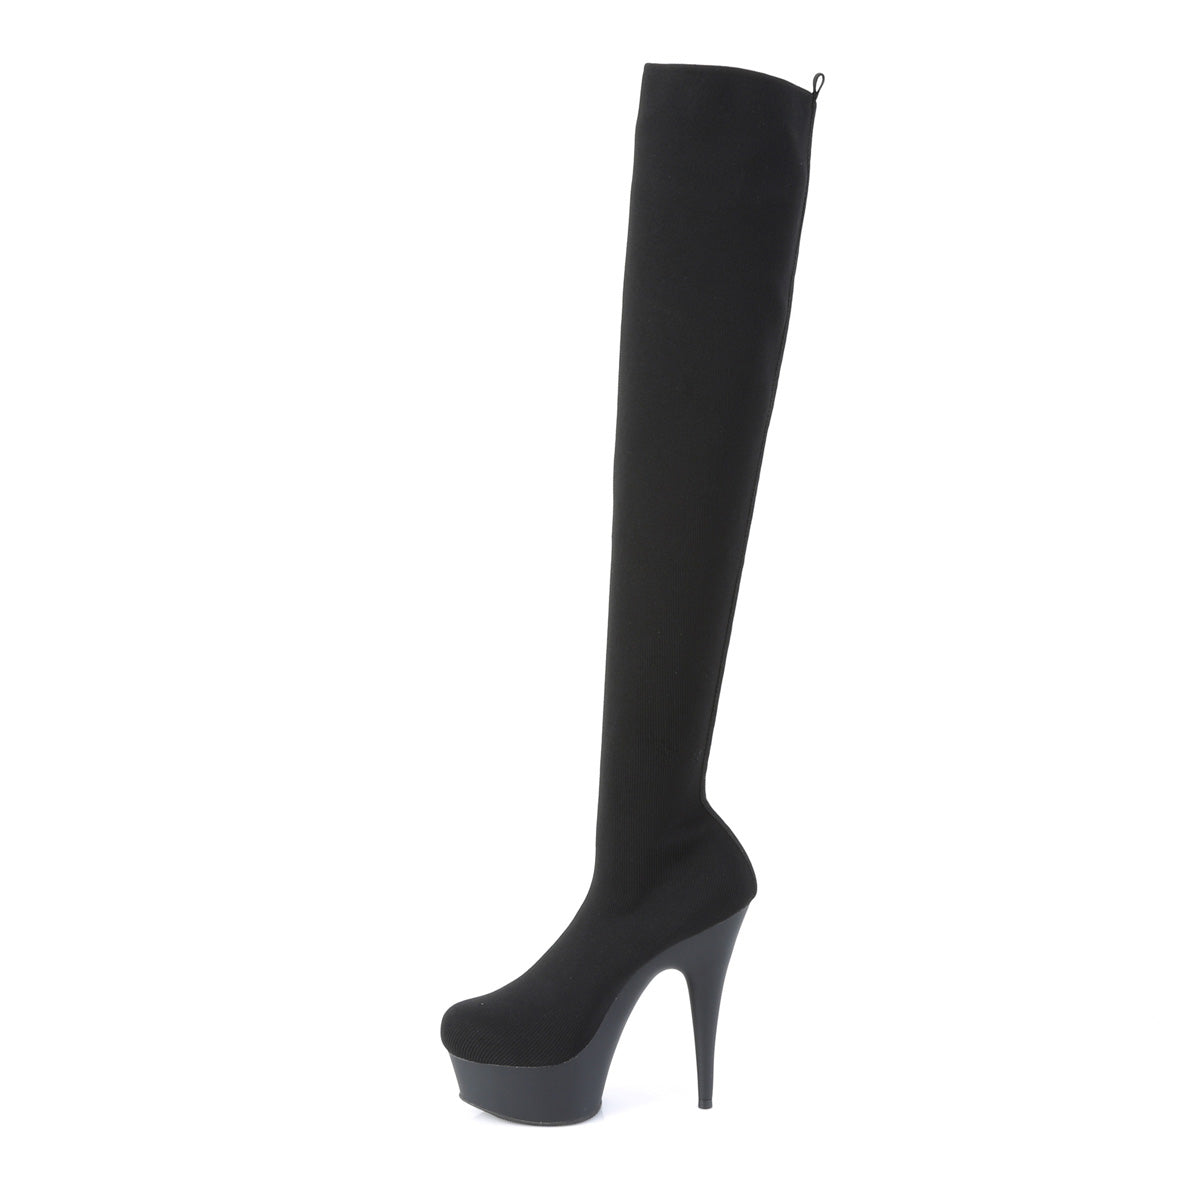 DELIGHT-3002-1 Pleaser 6" Heel Black Stretch Strippers Shoes-Pleaser- Sexy Shoes Pole Dance Heels